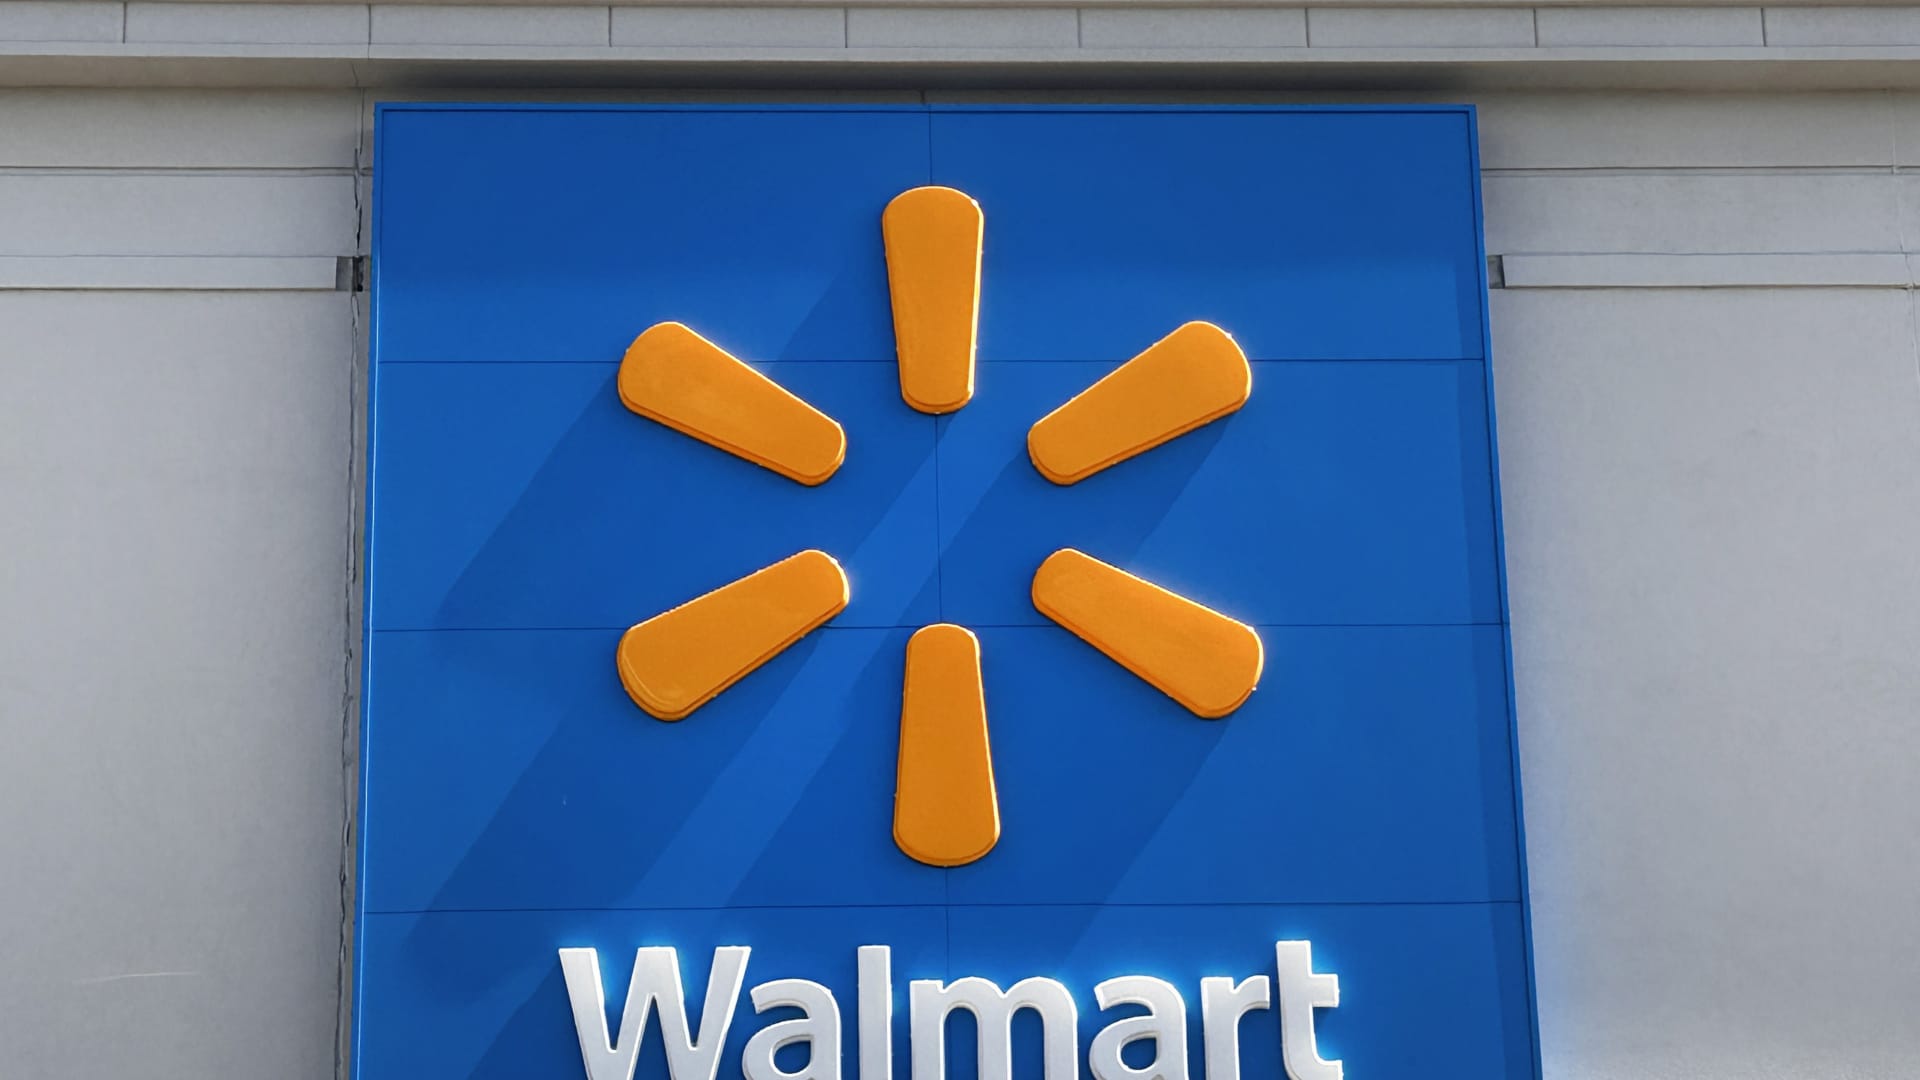 Walmart to reportedly lay off hundreds of company employees and relocate some others